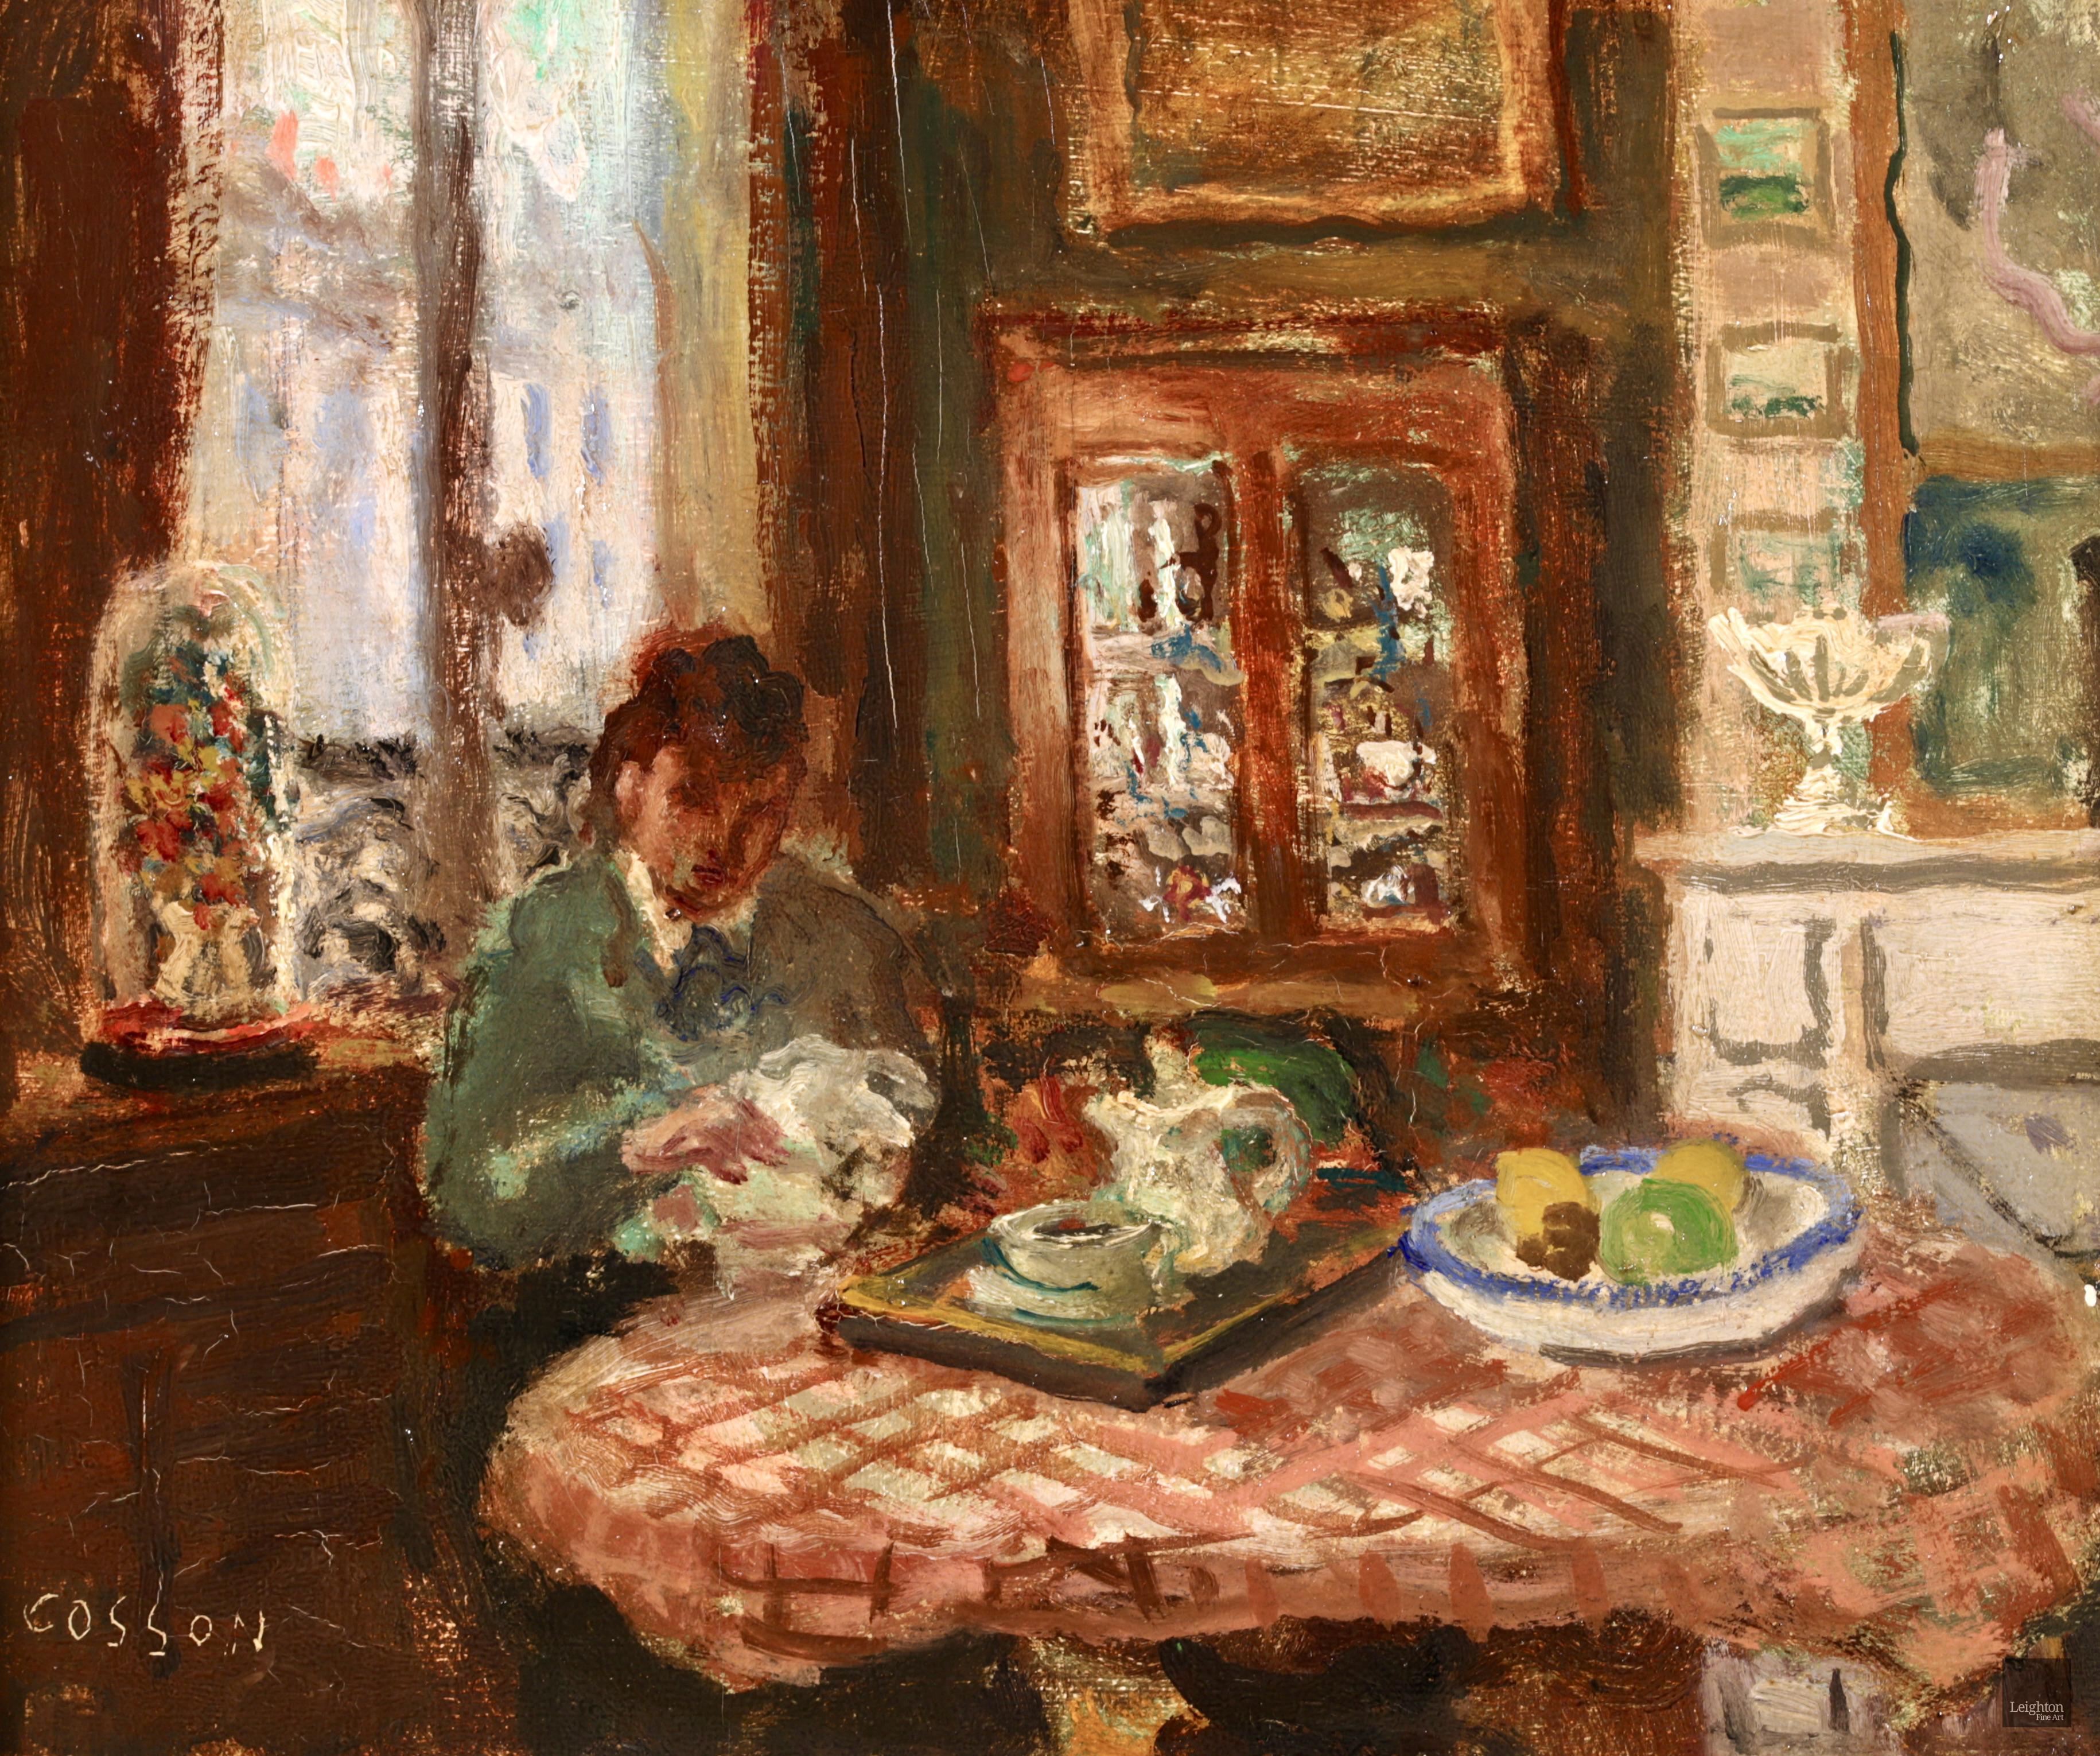 Au Salon - Post Impressionist Oil, Figure in Interior by Marcel Cosson - Painting by Jean-Louis-Marcel Cosson